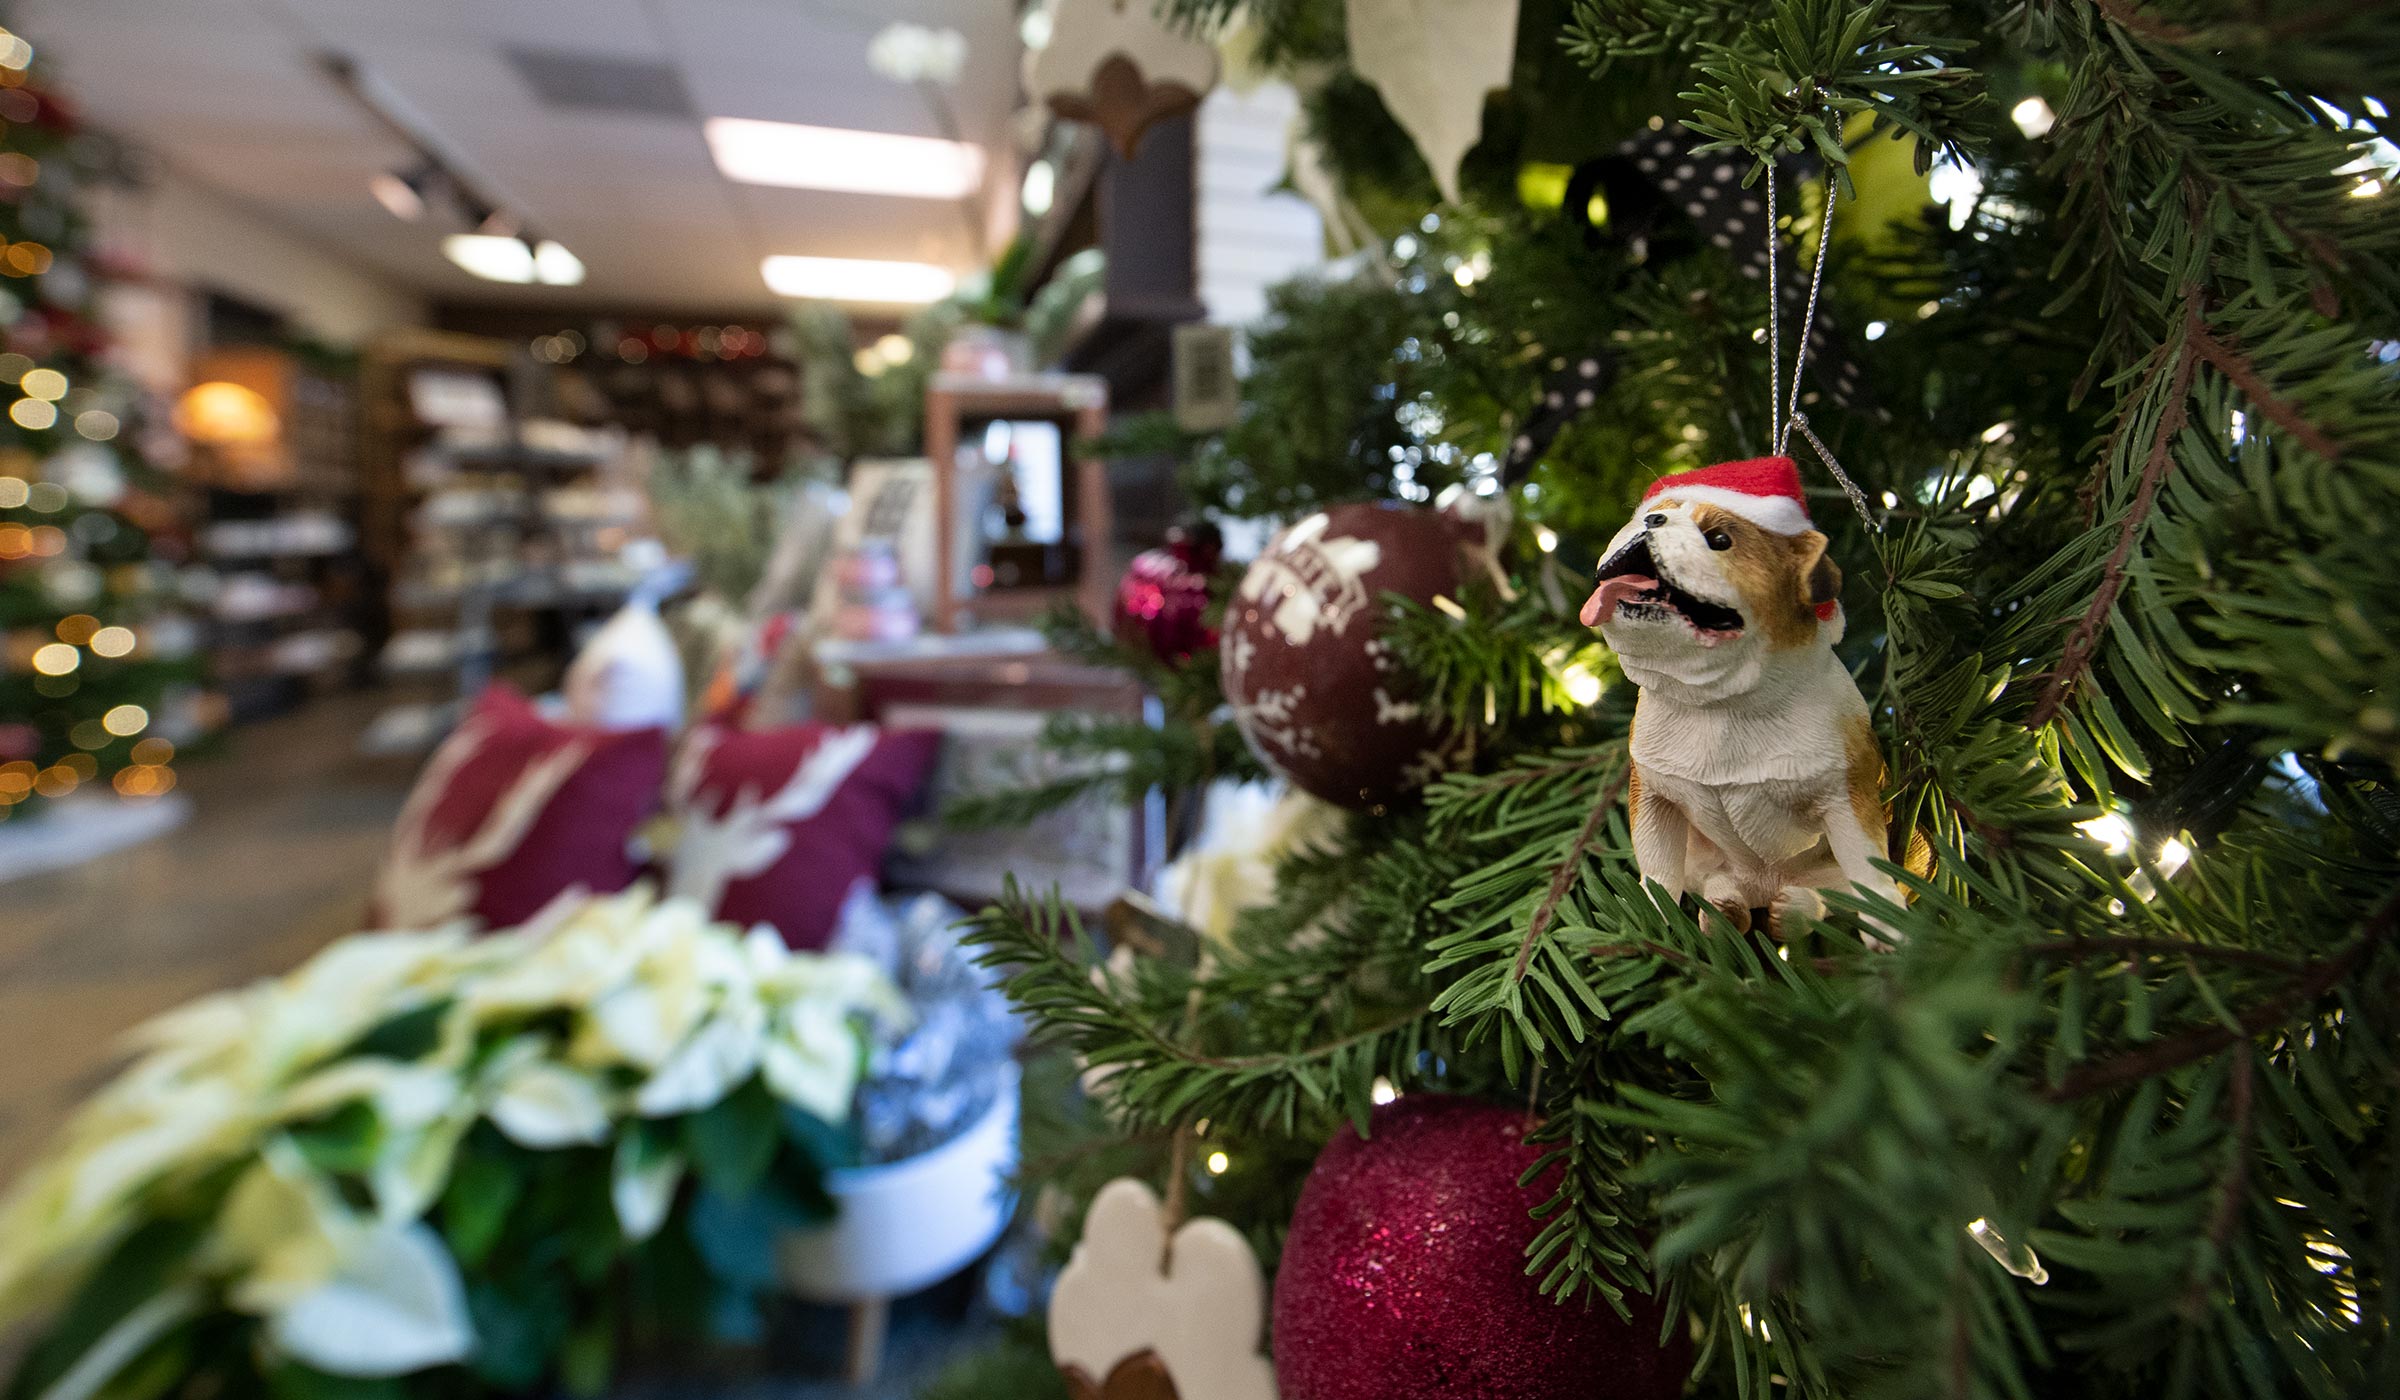 University Florist&#039;s Christmas decor for sale, with focus on a Bully ornament hanging on a Christmas tree.